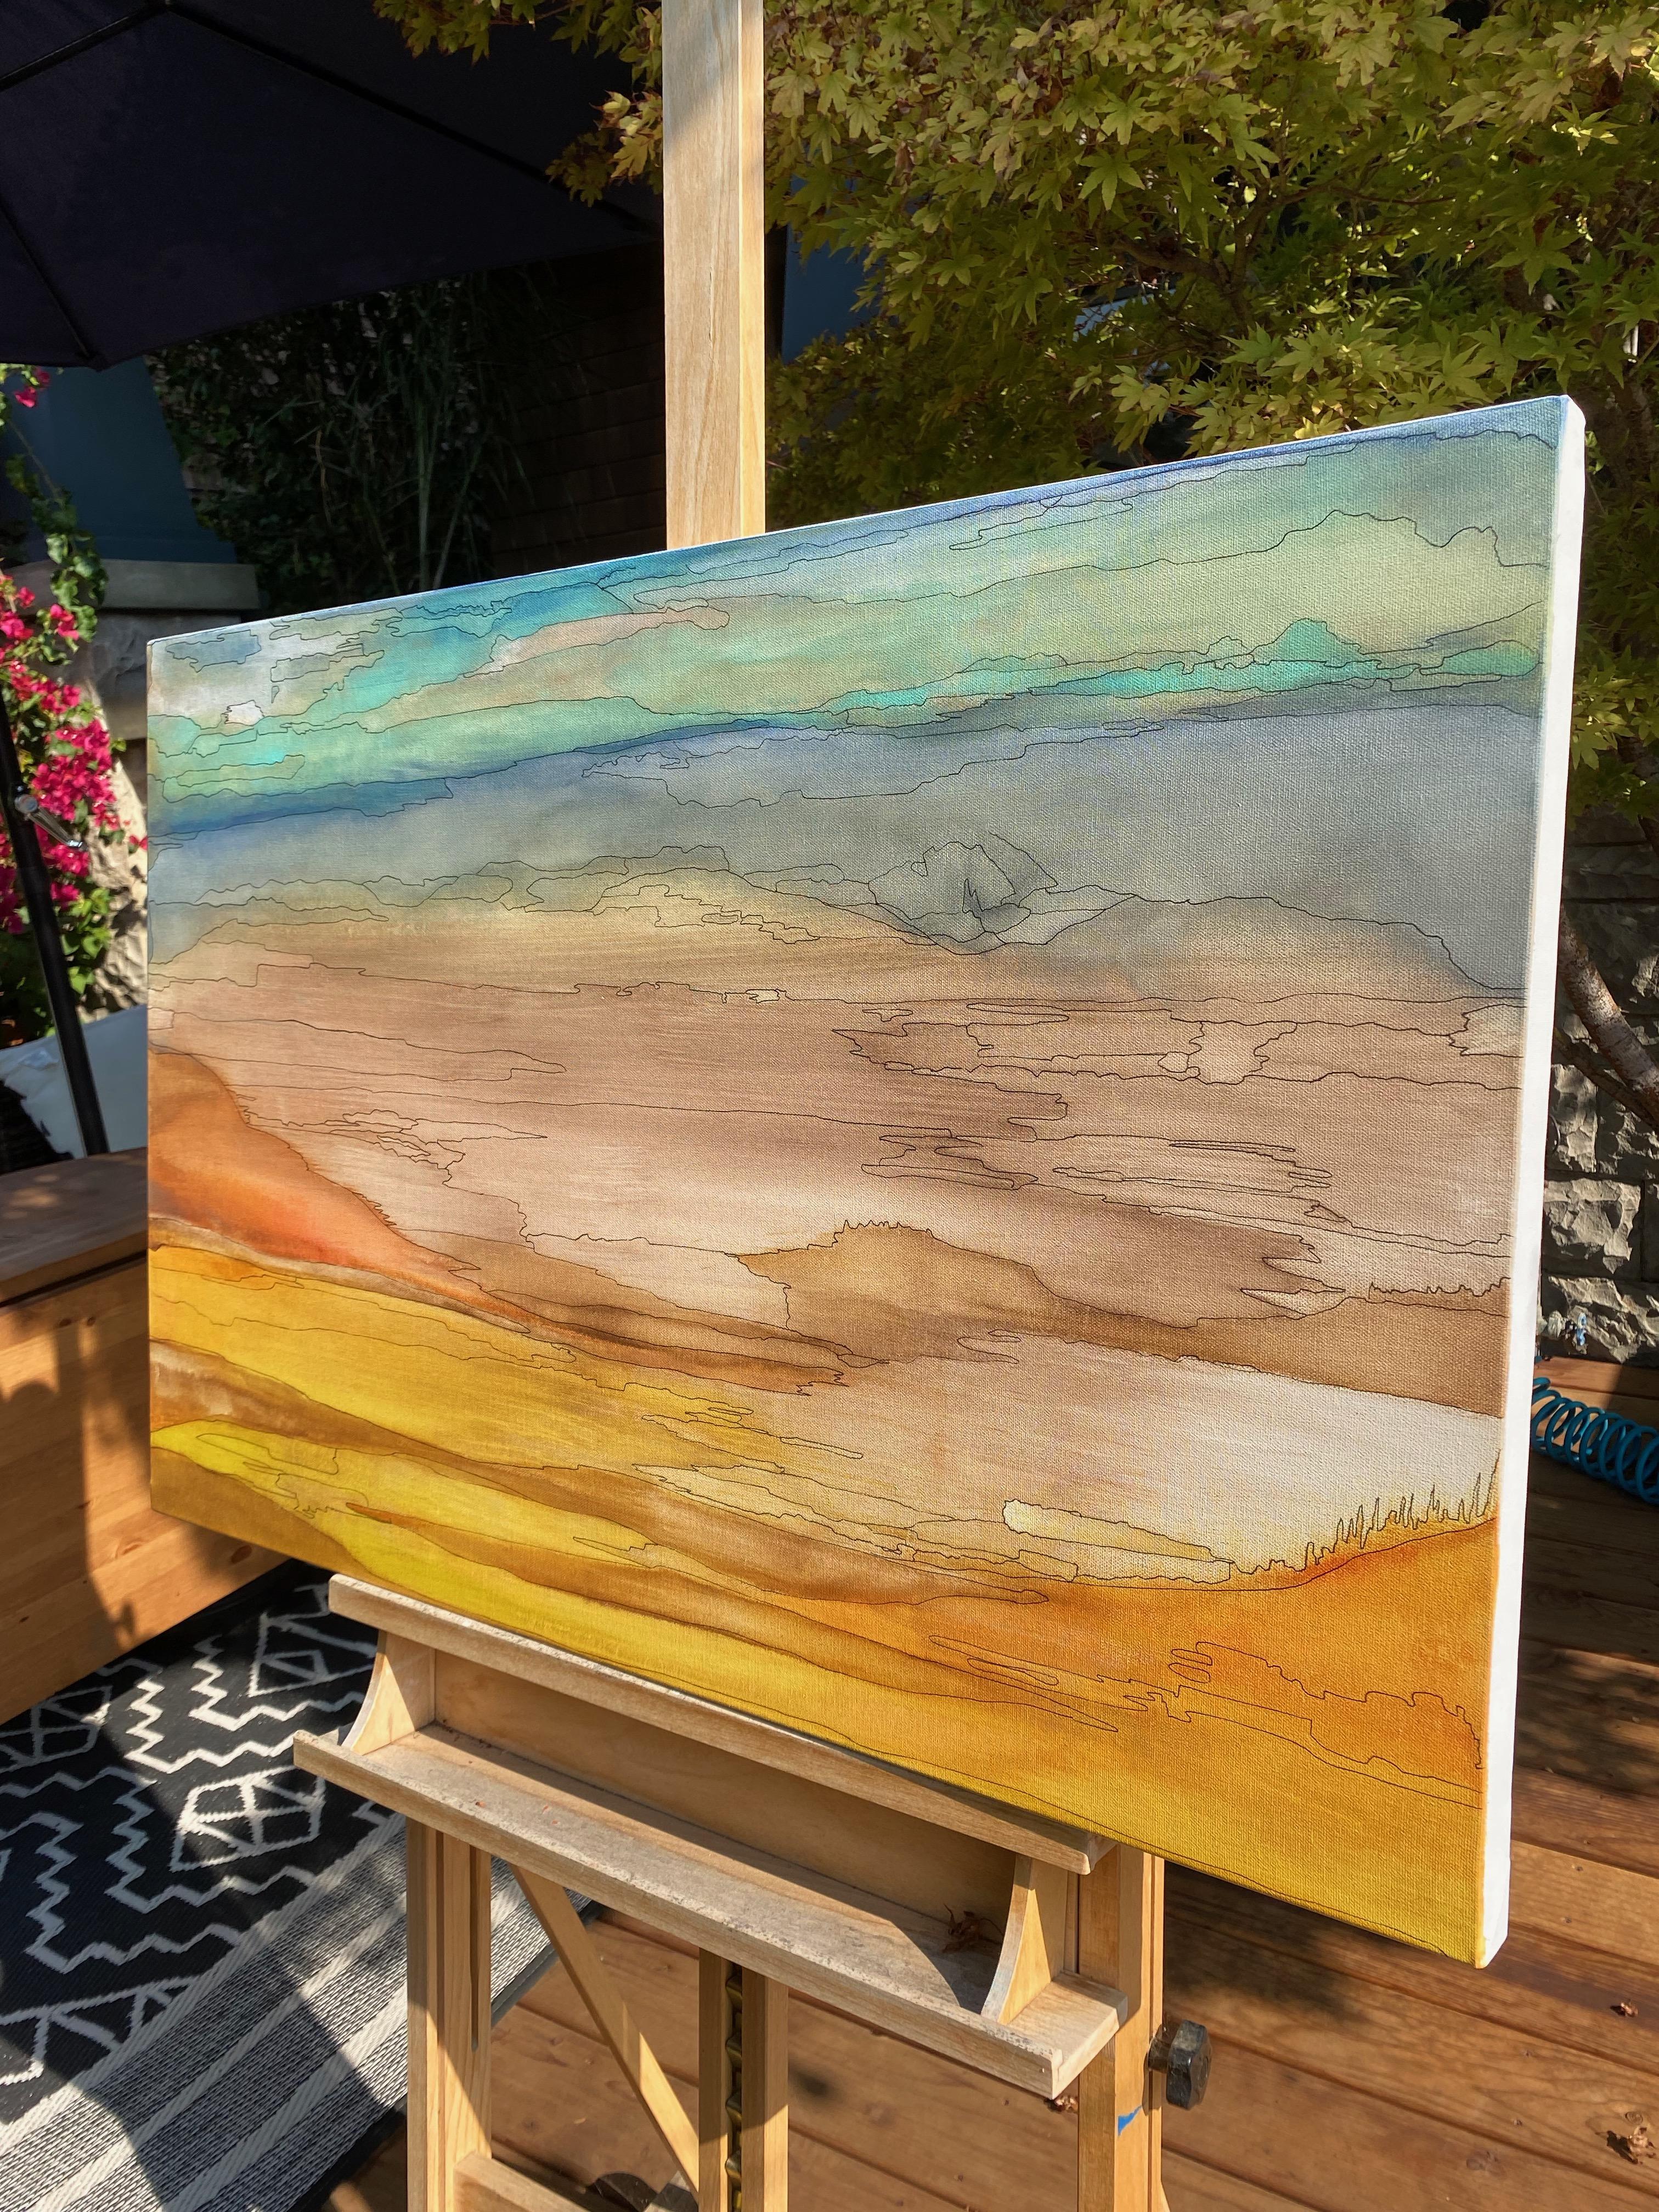 <p>Artist Comments<br>A warm coastal view of the ocean during sunset. Artist Alicia Dunn portrays a scenic expanse of clouds hovering above waters with hues of turquoise blending into an orange gradient. 